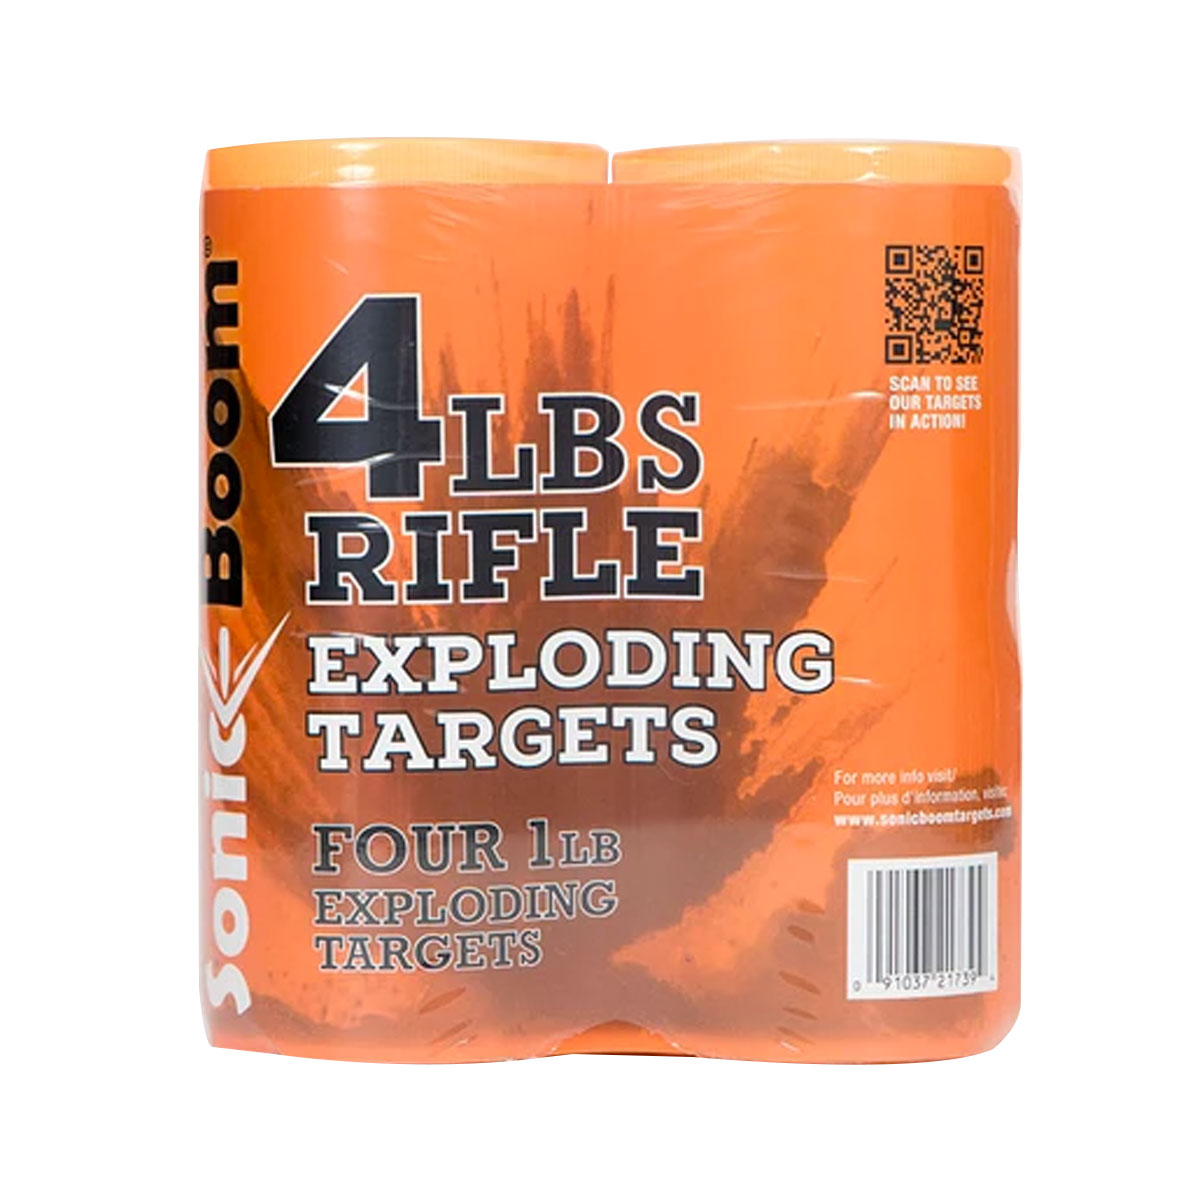 SONIC BOOM 1LB EXPLODING RIFLE TARGET - 4 PACK Photo